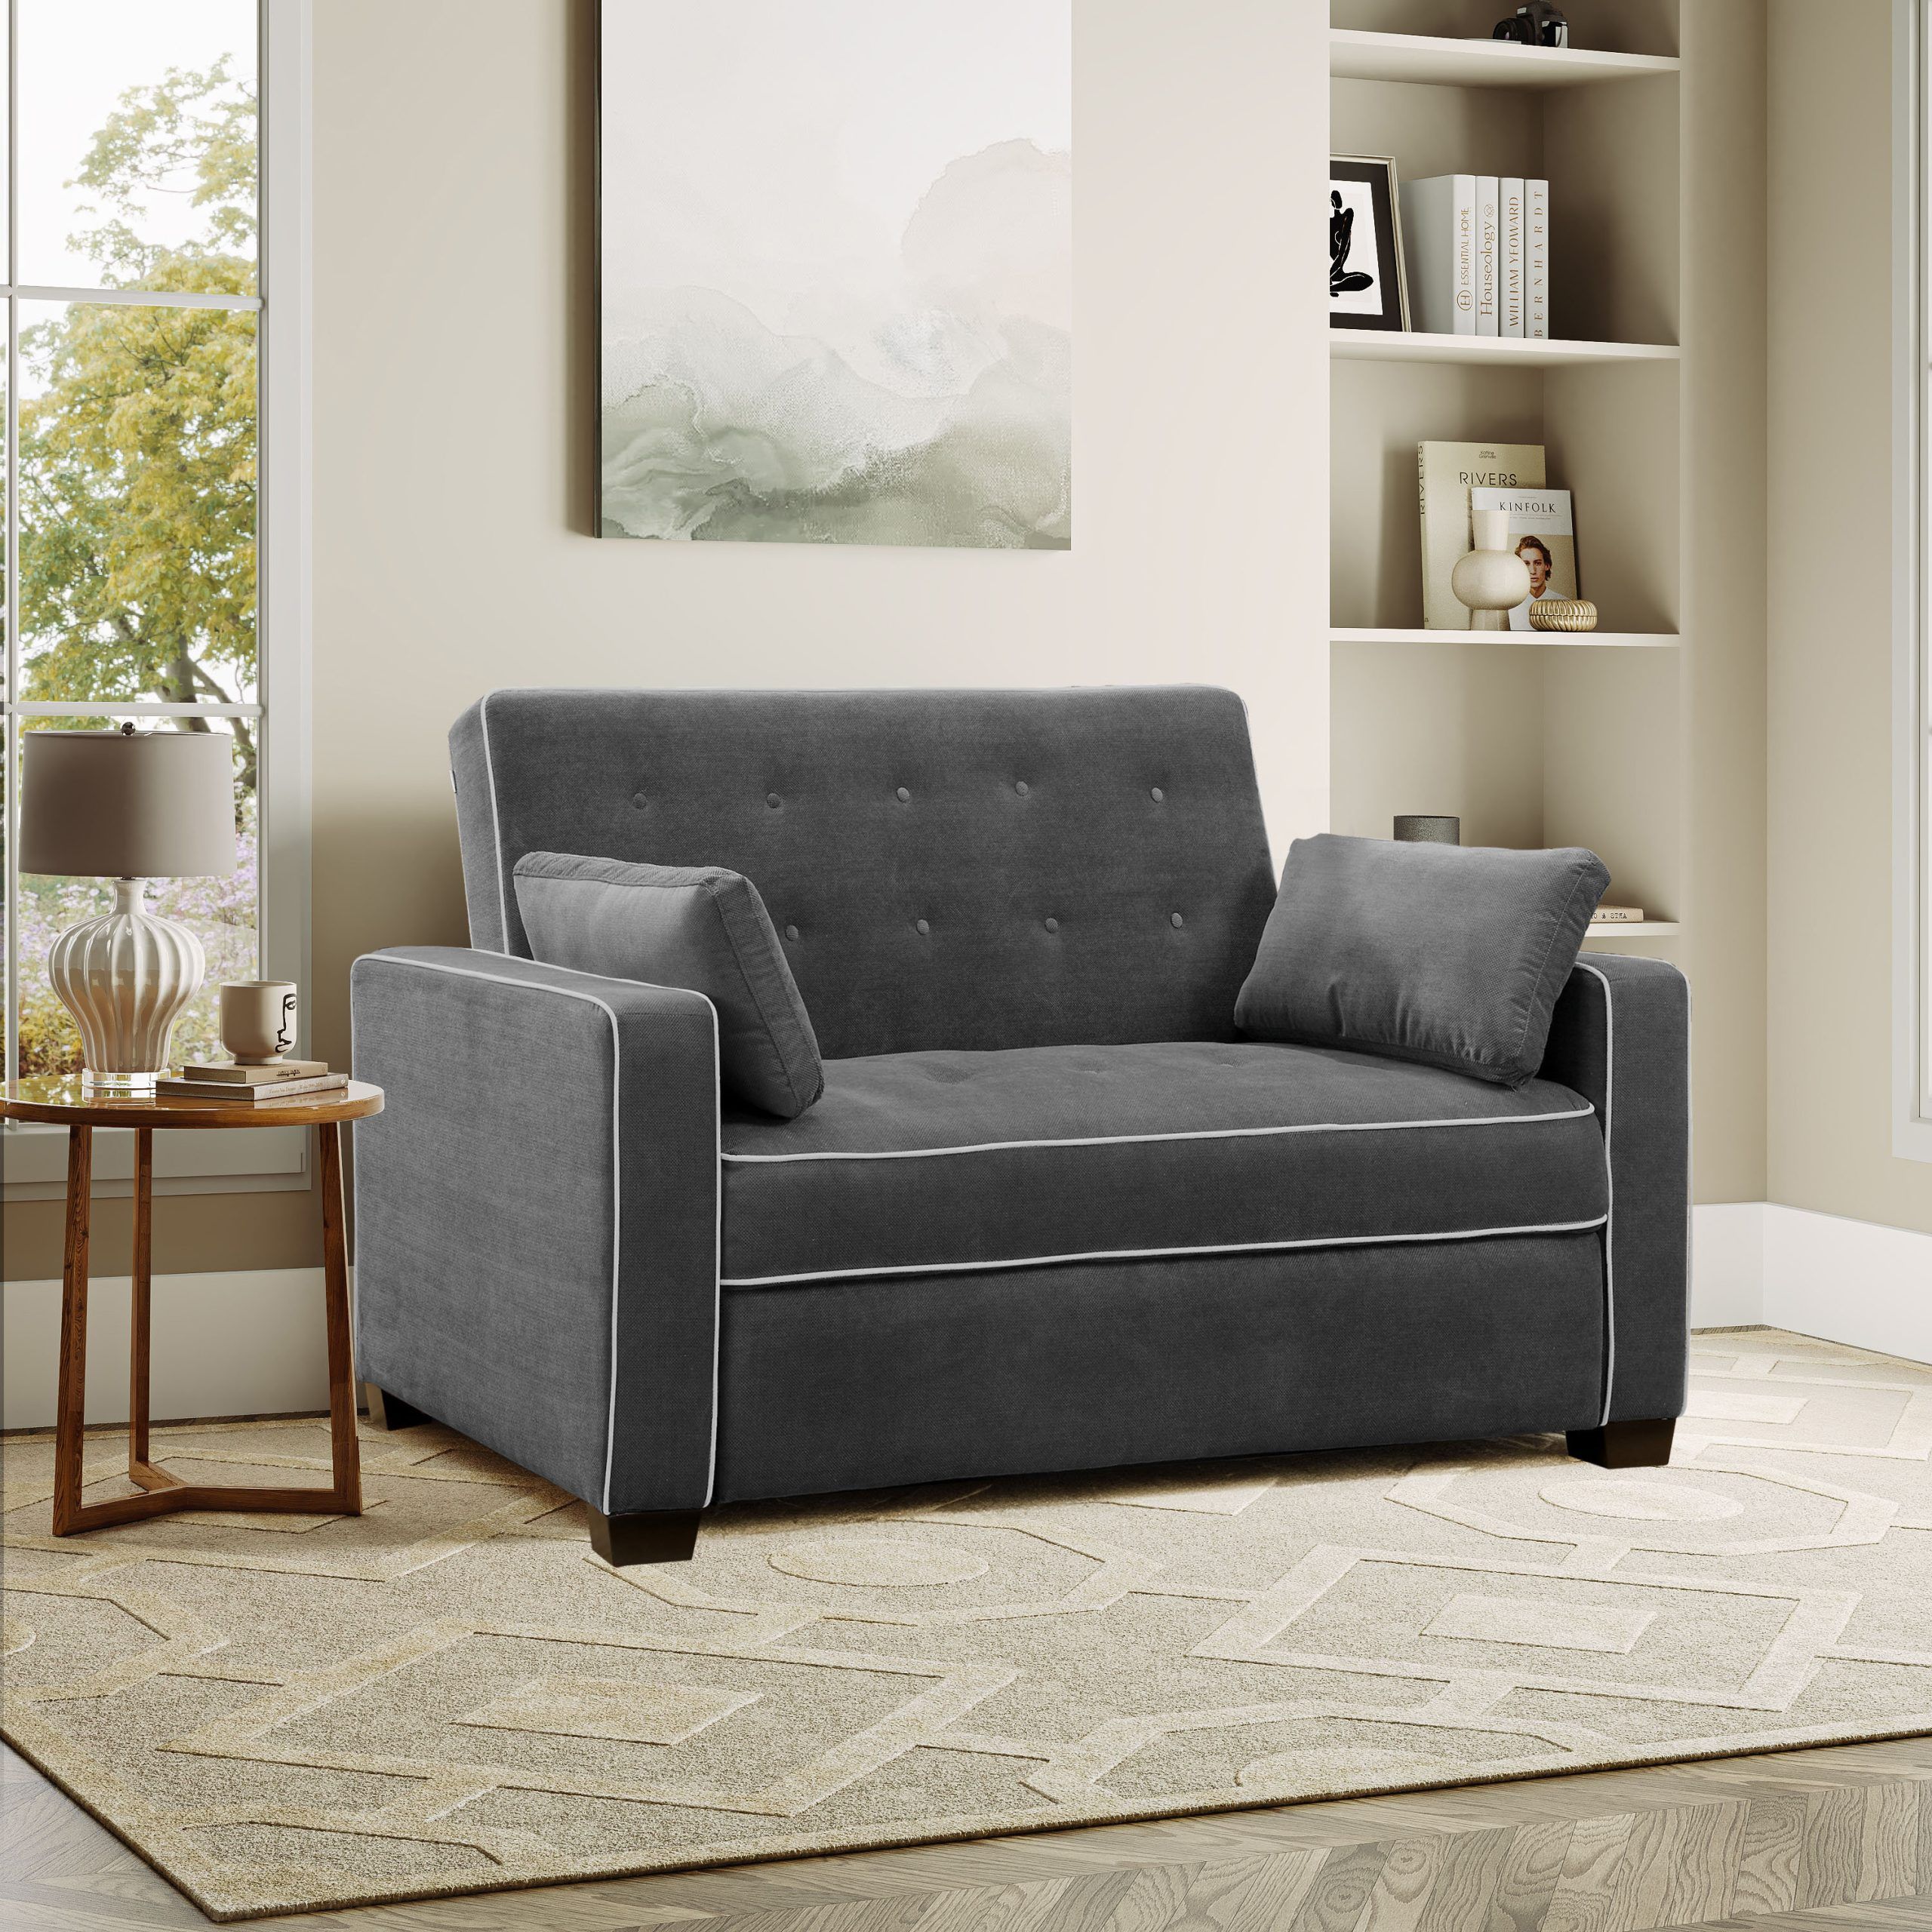 Serta Monroe Full Size Convertible Sleeper Sofa With Cushions & Reviews |  Wayfair With 8 Seat Convertible Sofas (View 4 of 15)